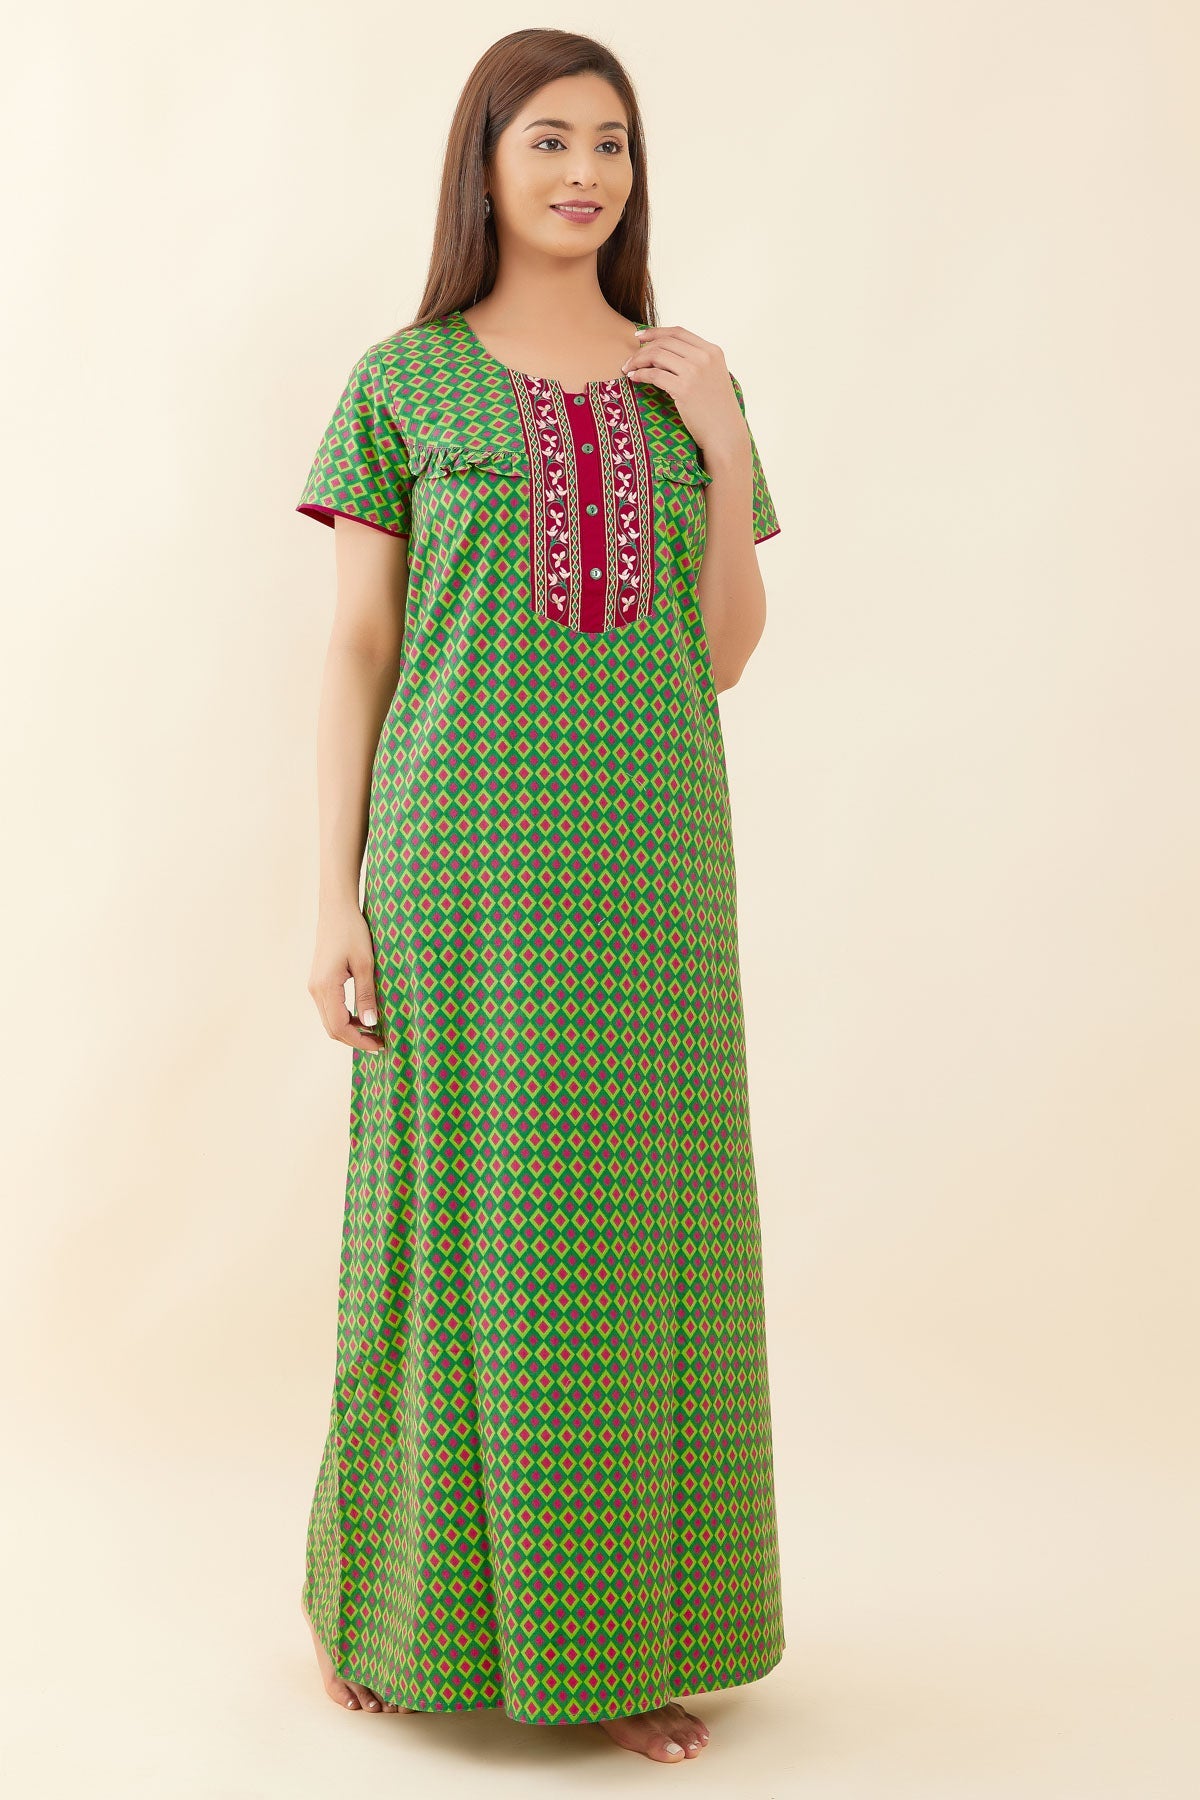 All Over Geometric Printed With Pleat Embellished Yoke Nighty - Green